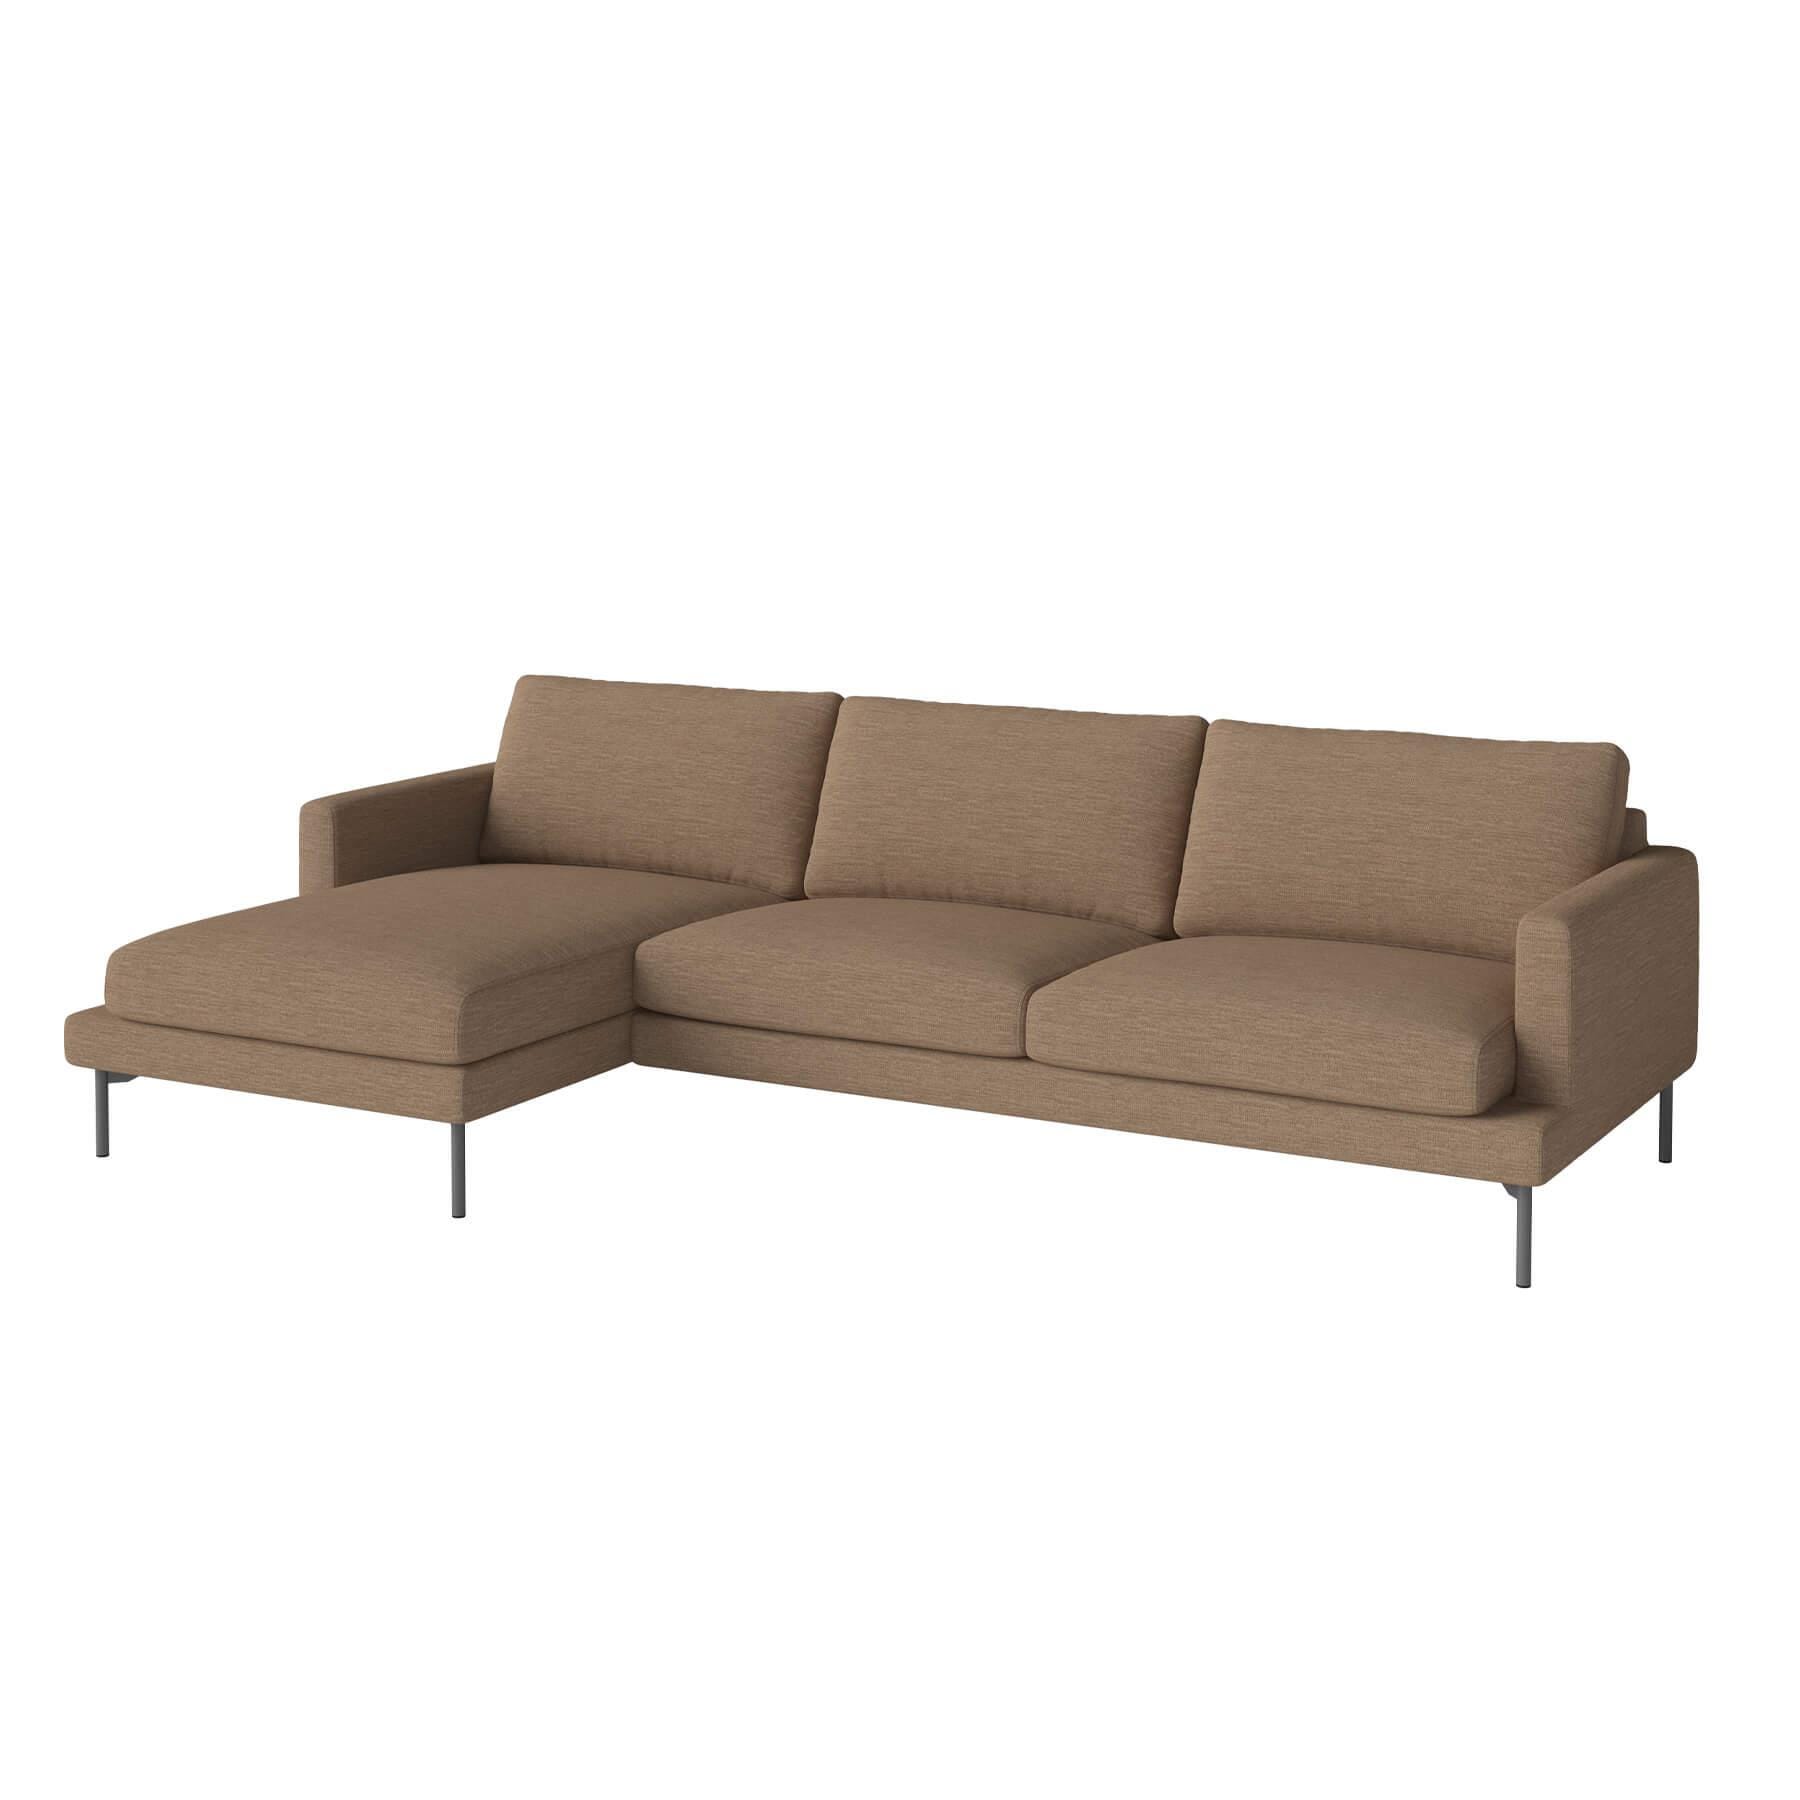 Bolia Veneda Sofa 35 Seater Sofa With Chaise Longue Grey Laquered Steel Laine Light Brown Left Brown Designer Furniture From Holloways Of Ludlow